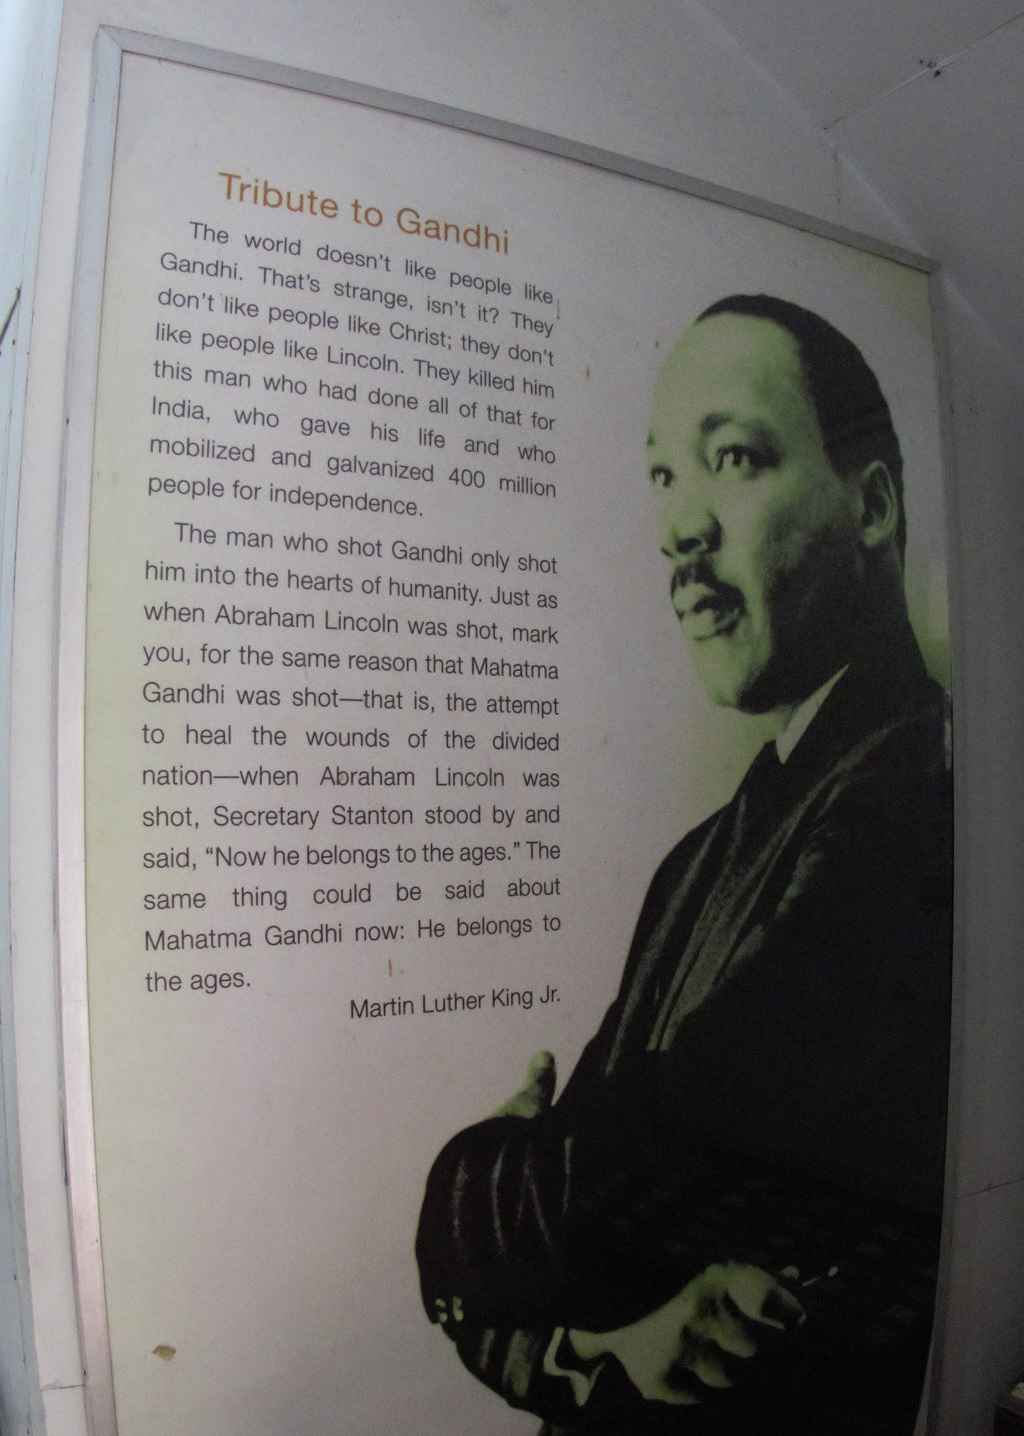 Tribute to Gandhi by Martin Luther King Jr.